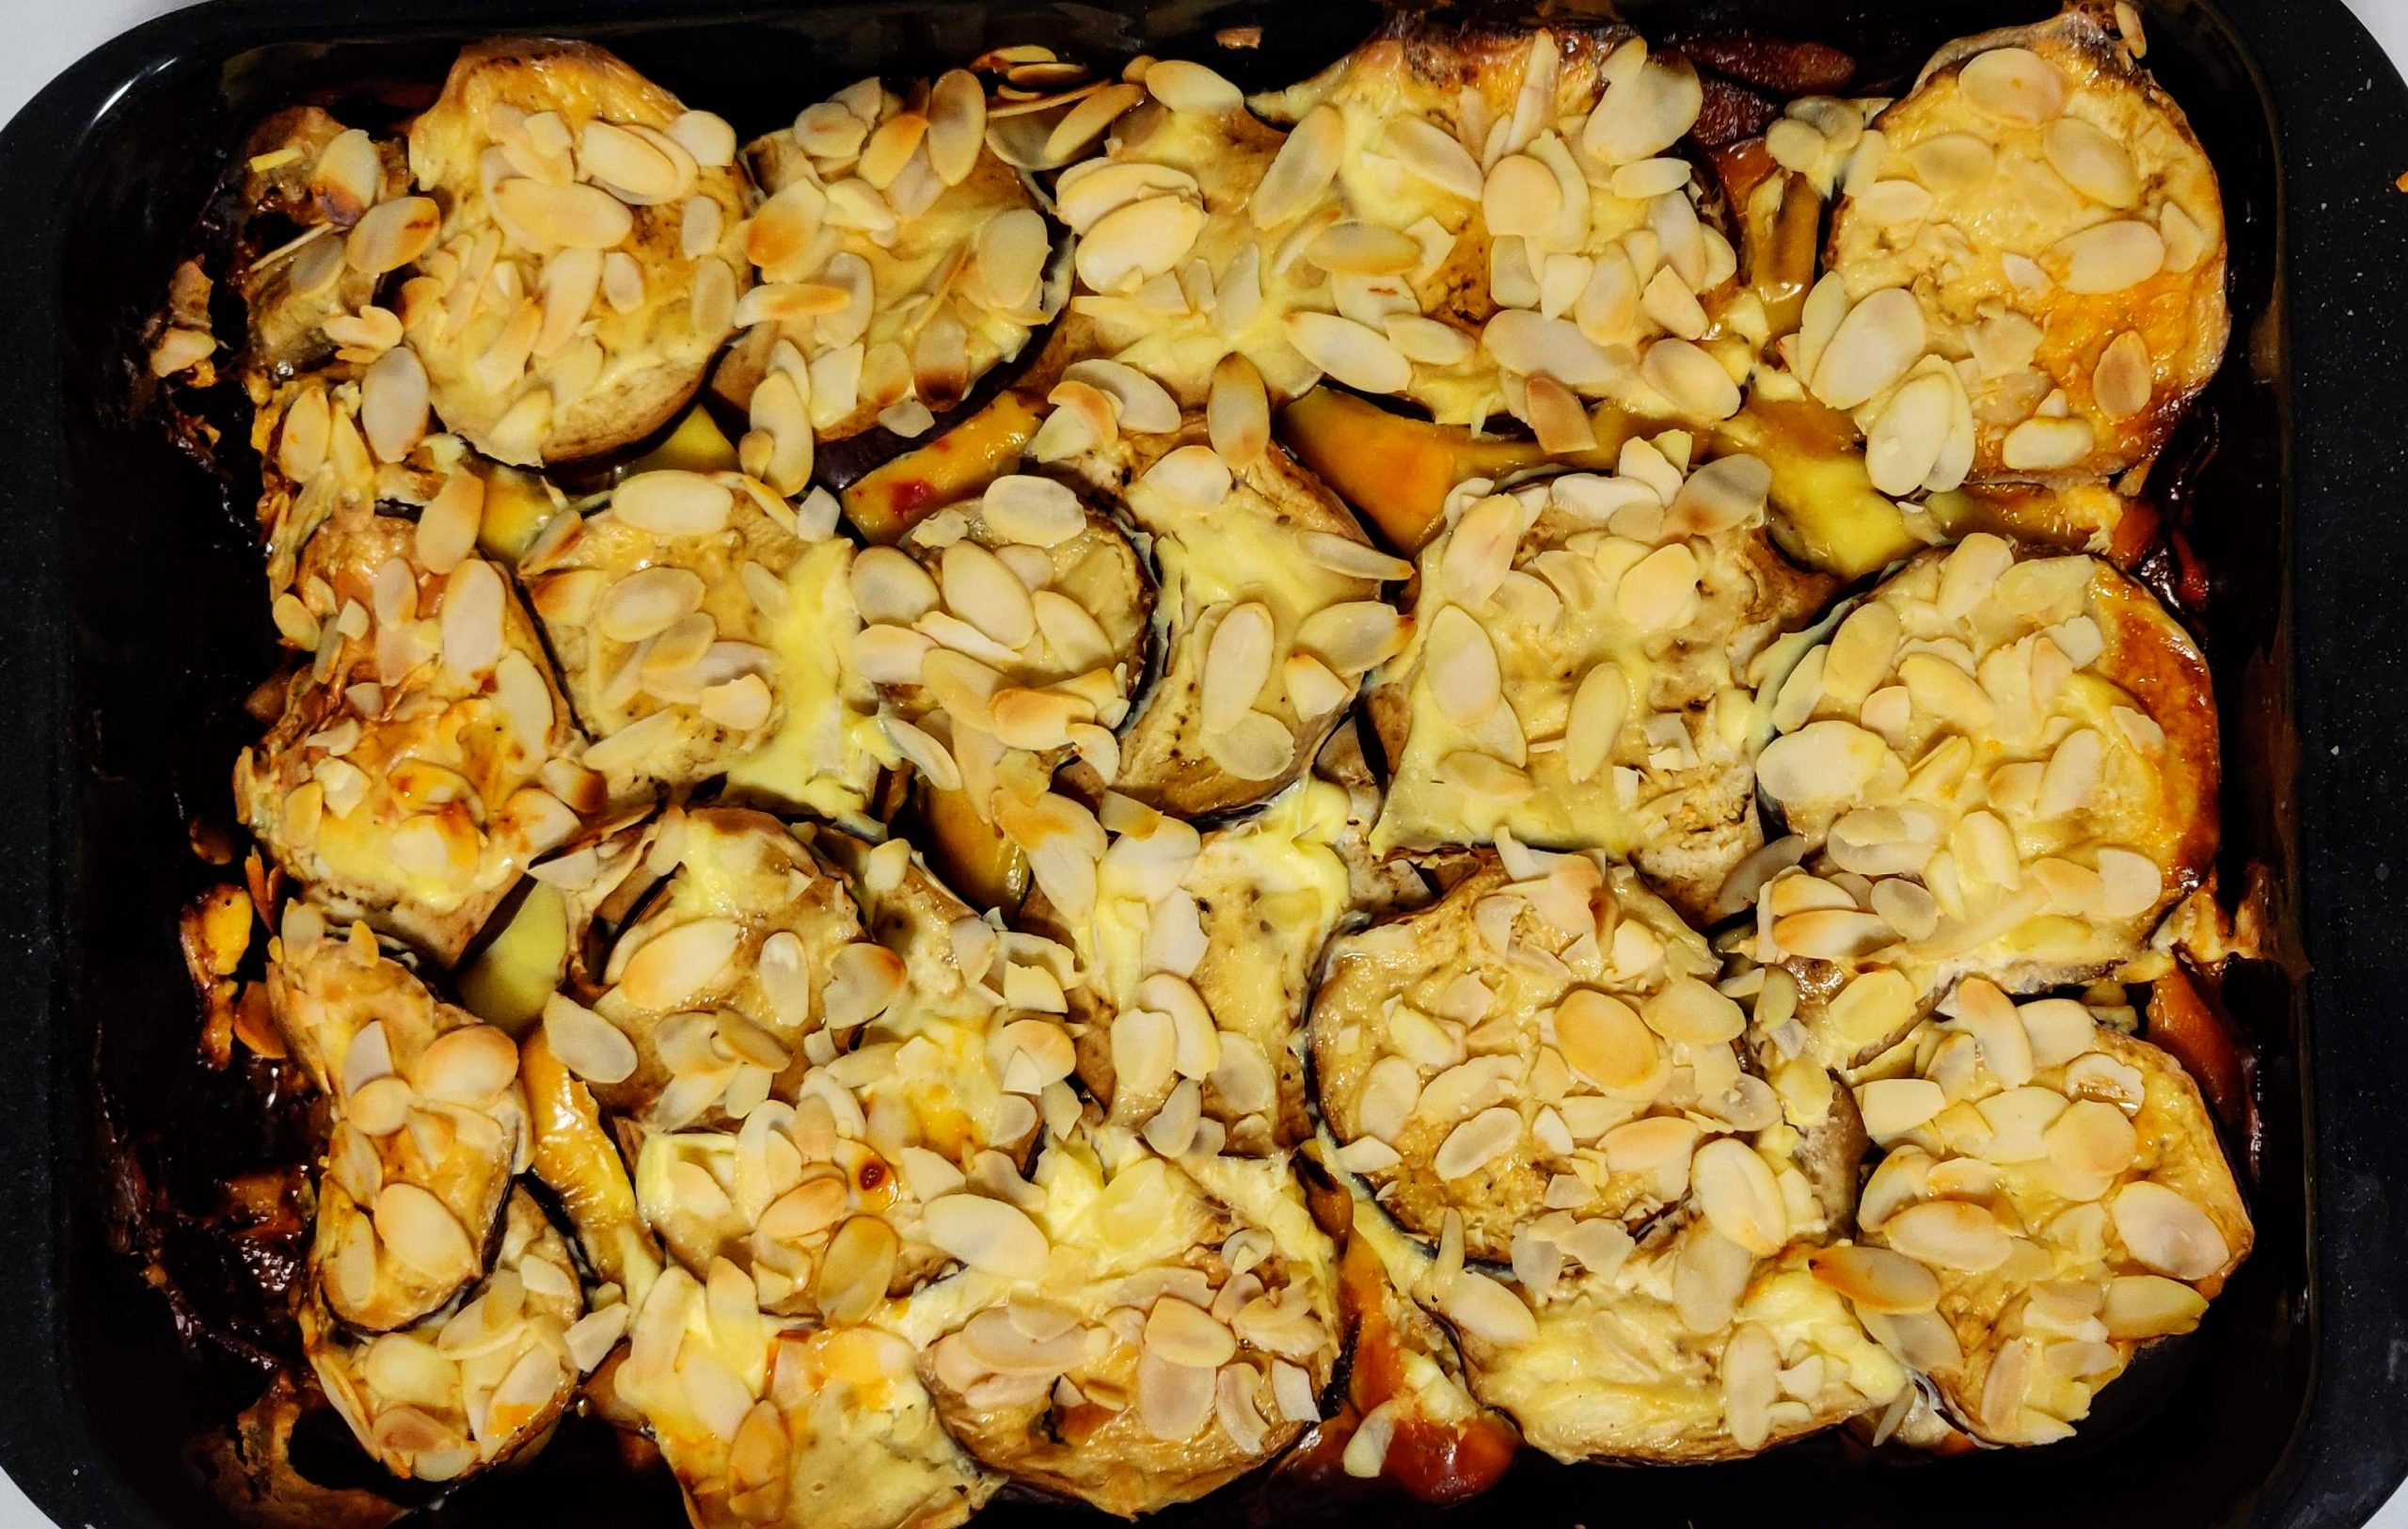 Aubergine and other vegetable bake sprinkled with almonds